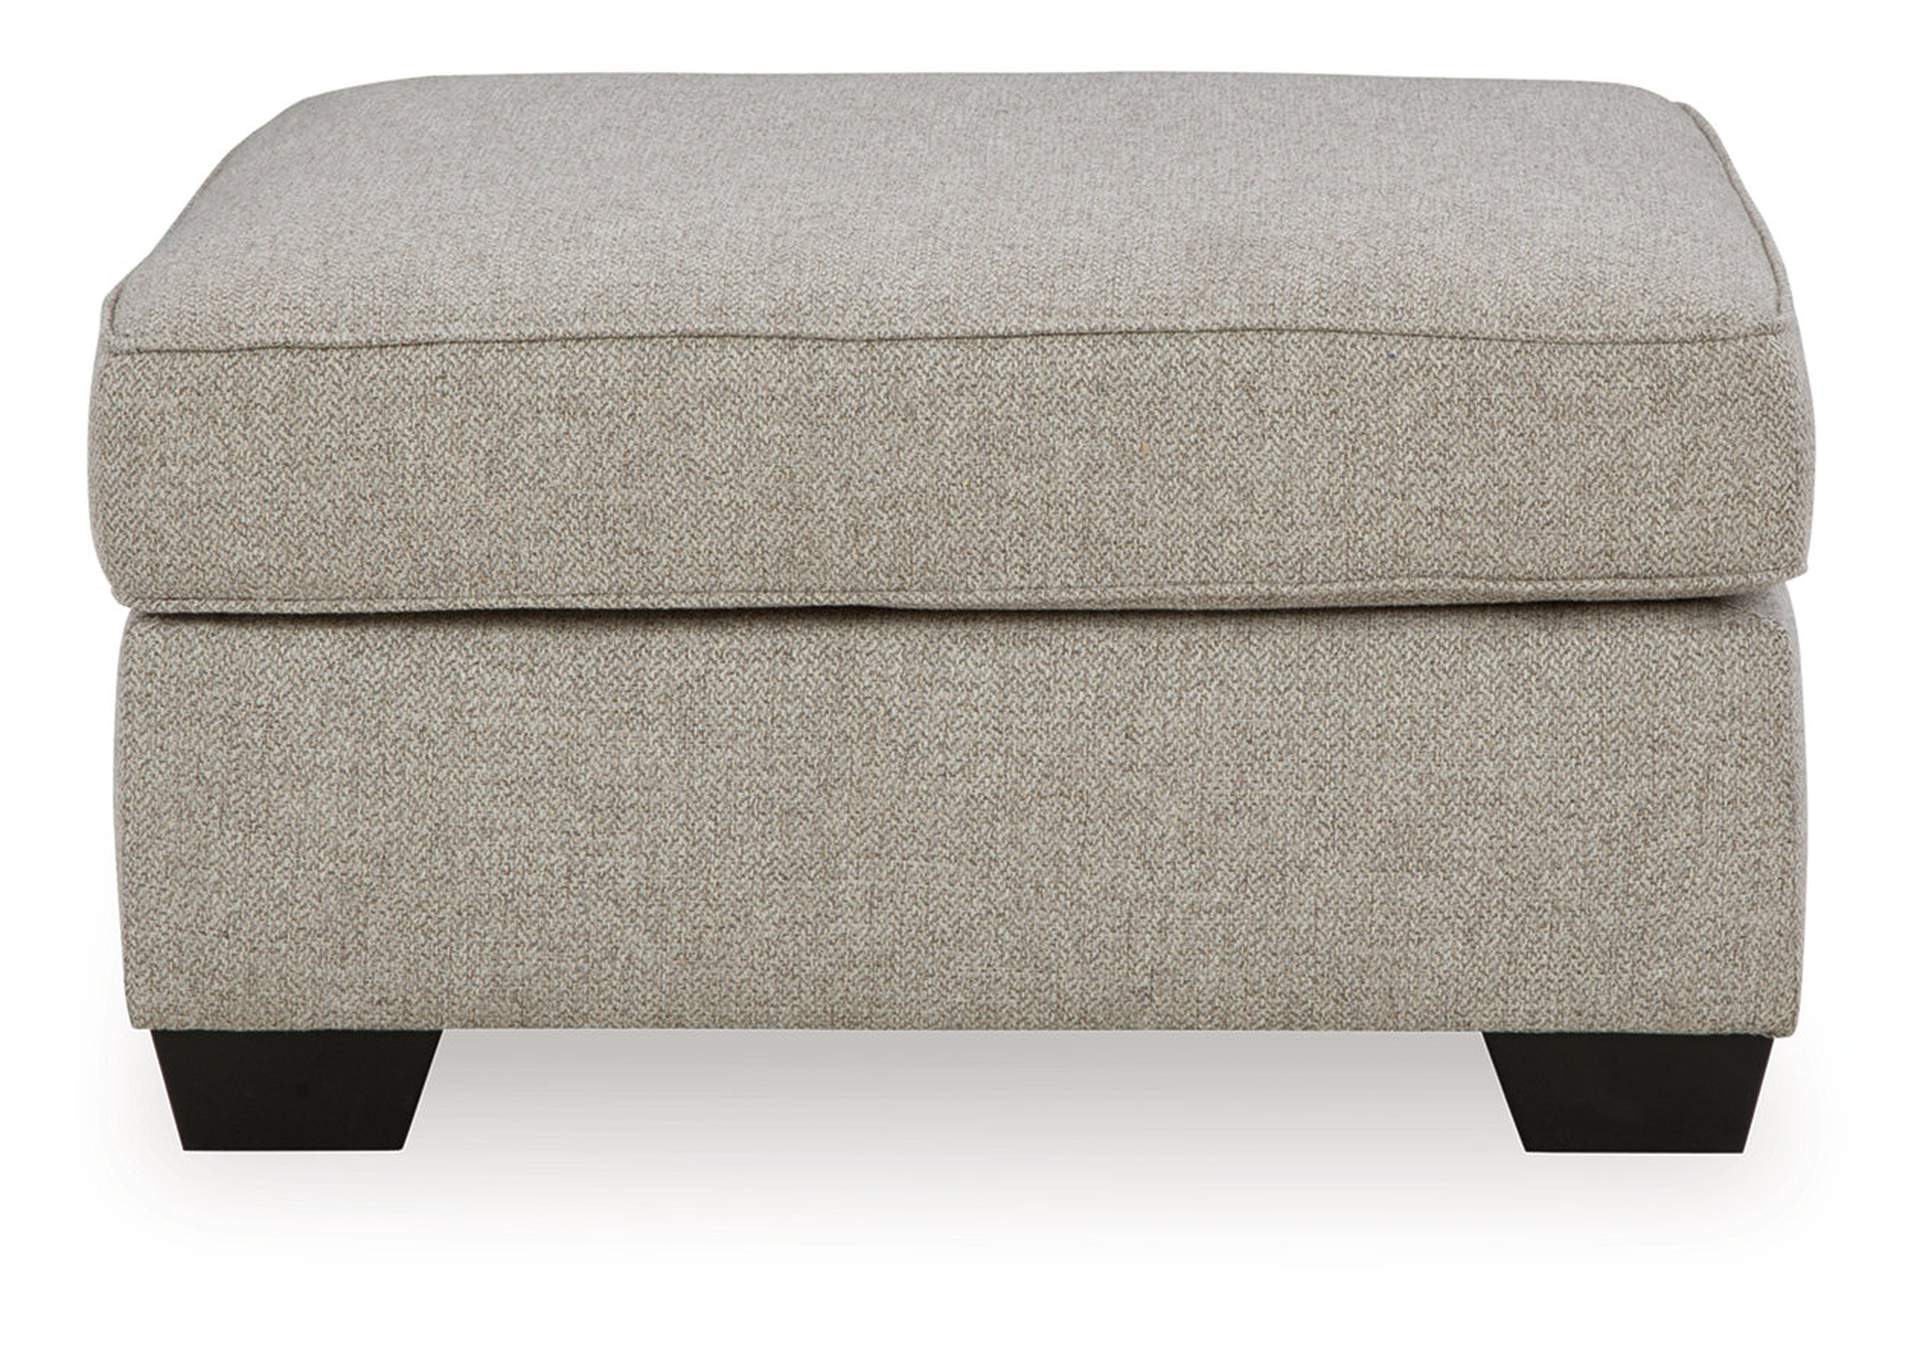 Reydell Oversized Accent Ottoman,Signature Design By Ashley